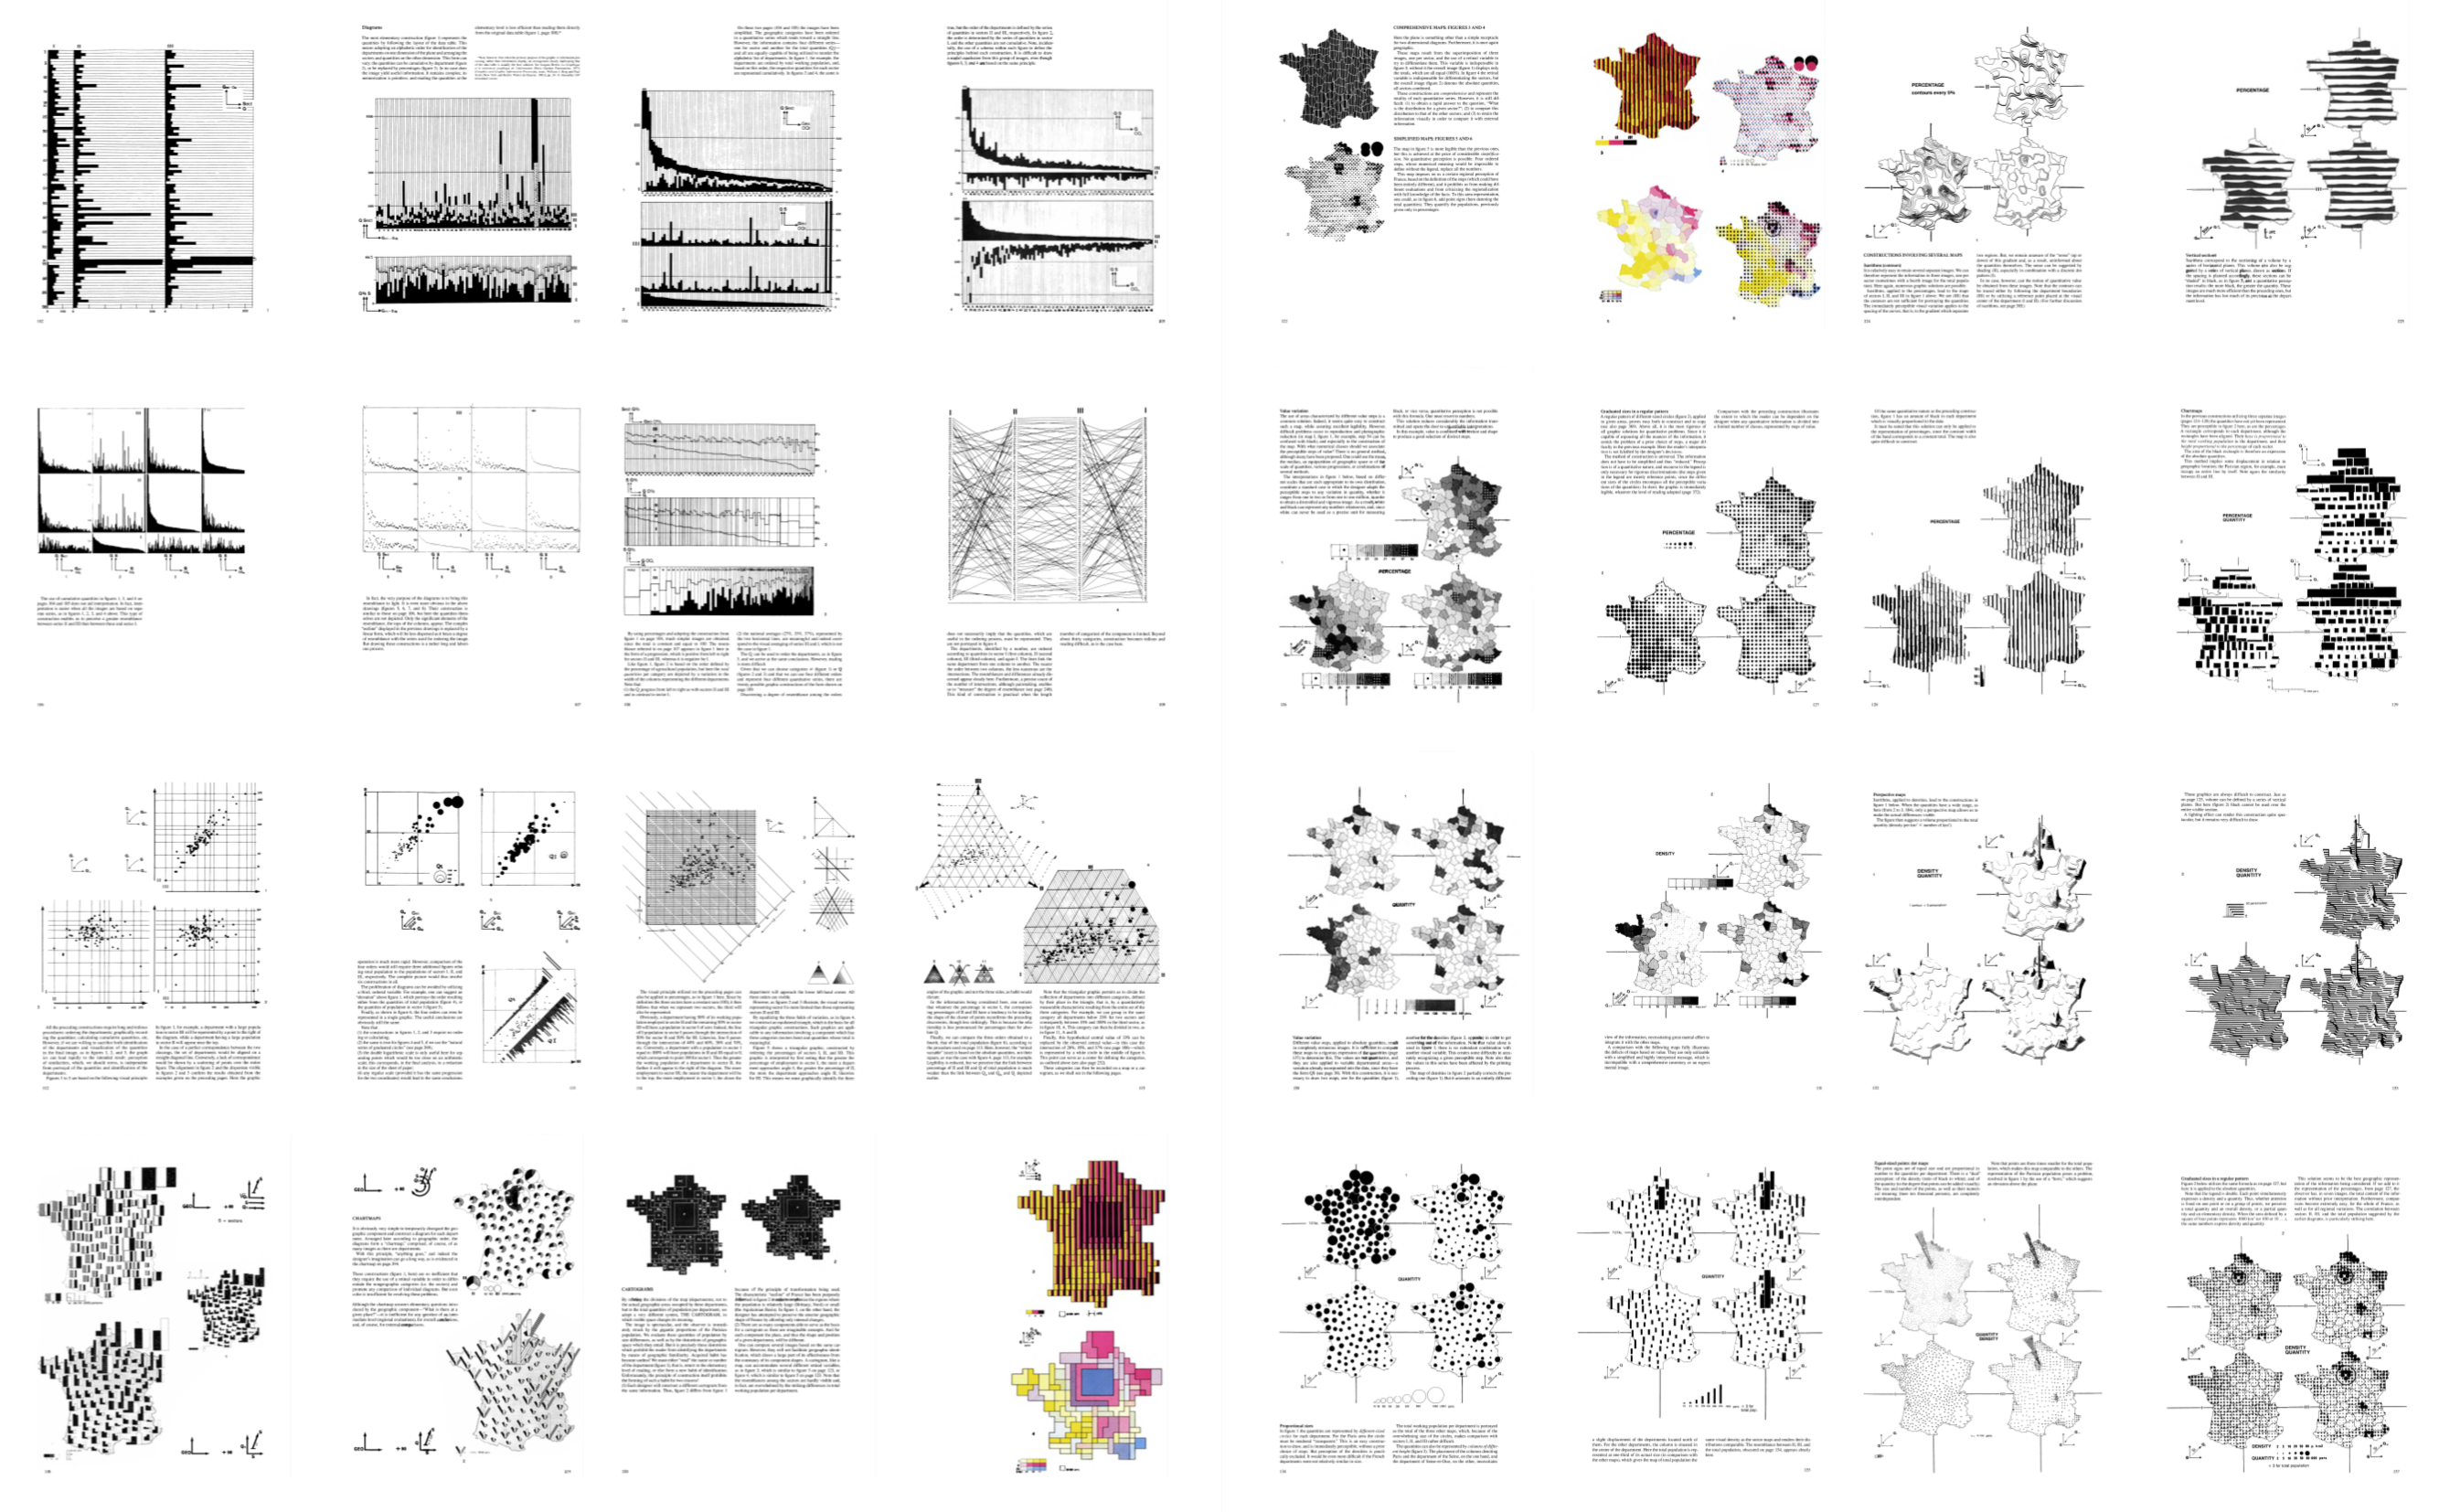 Remaking Figures from Semiology of Graphics